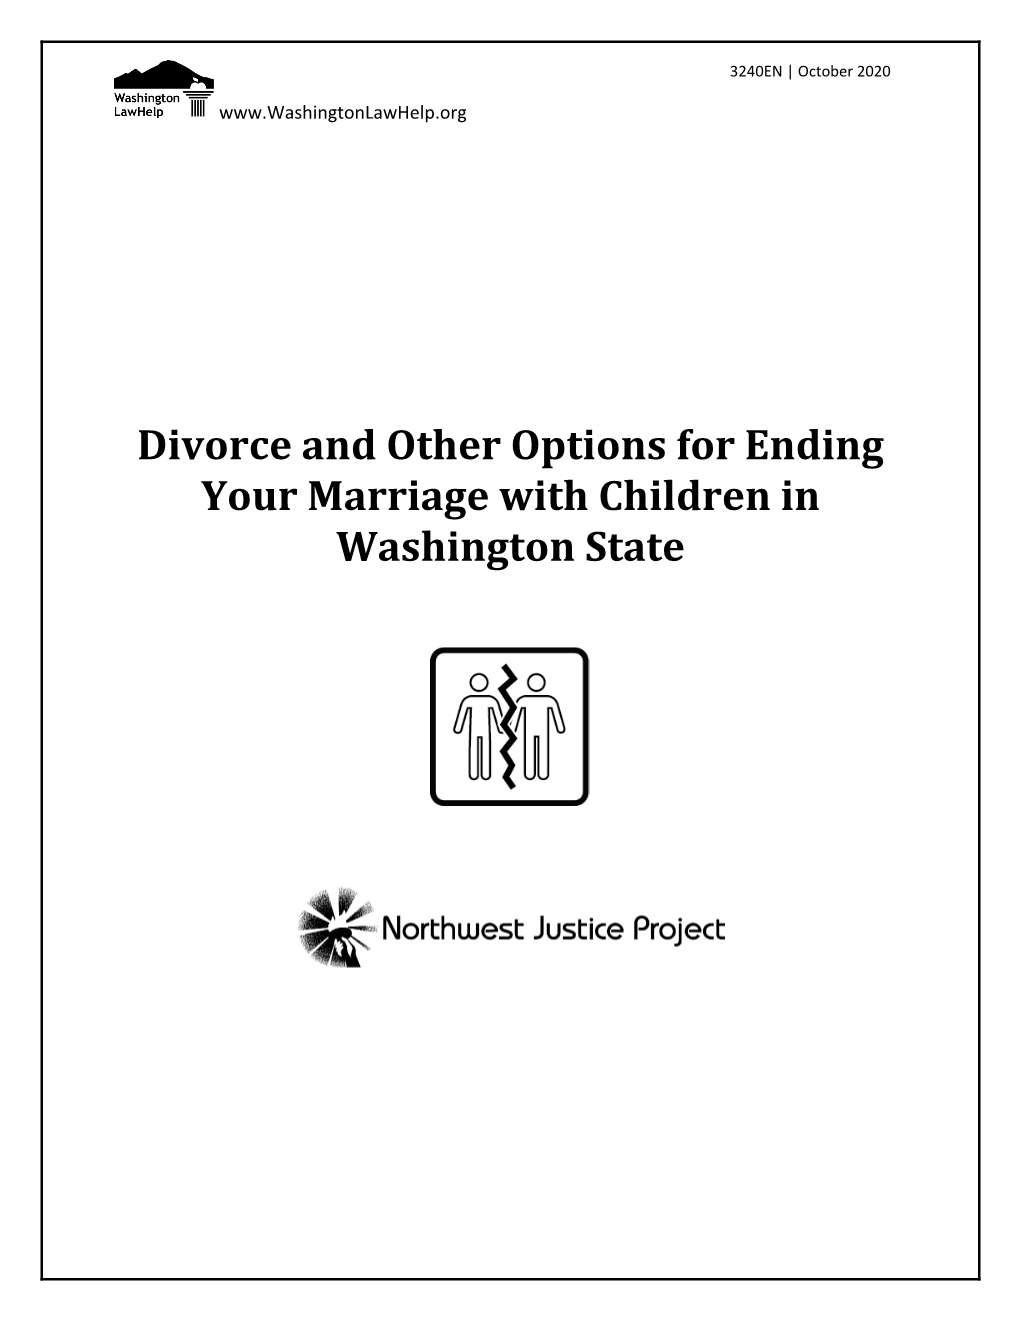 Divorce and Other Options for Ending Your Marriage with Children in Washington State